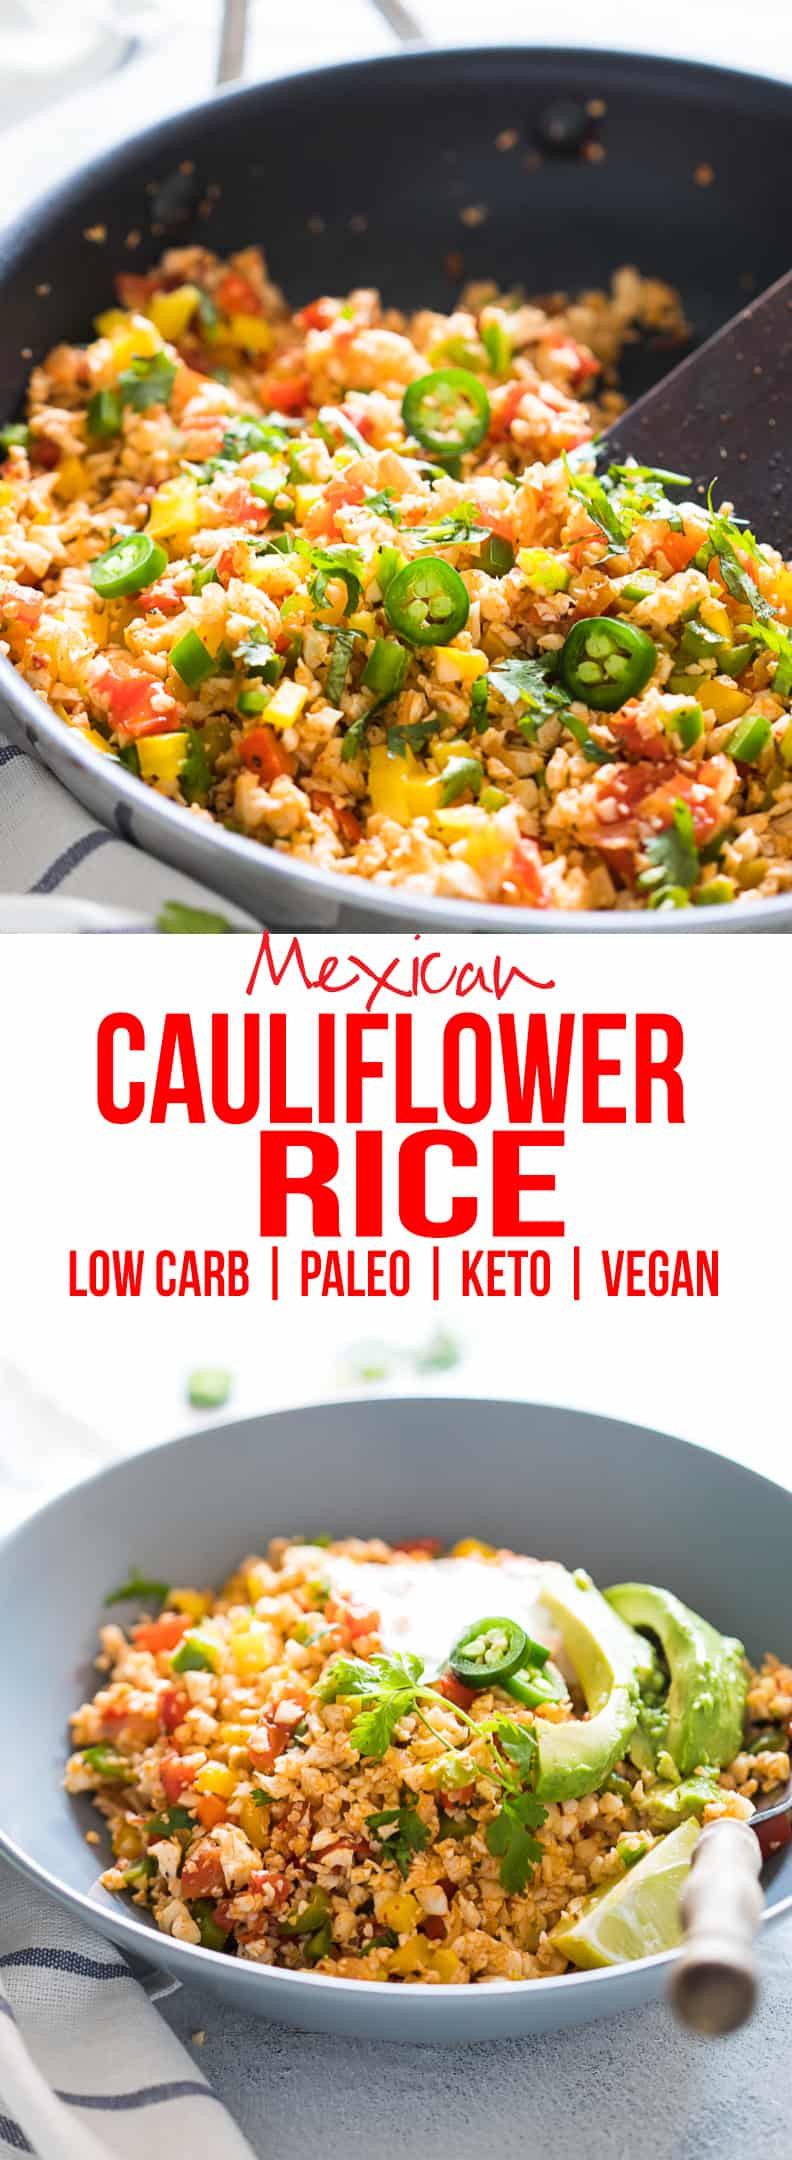 Low Carb Mexican Recipes
 Low Carb Mexican Cauliflower Rice Paleo Vegan Keto